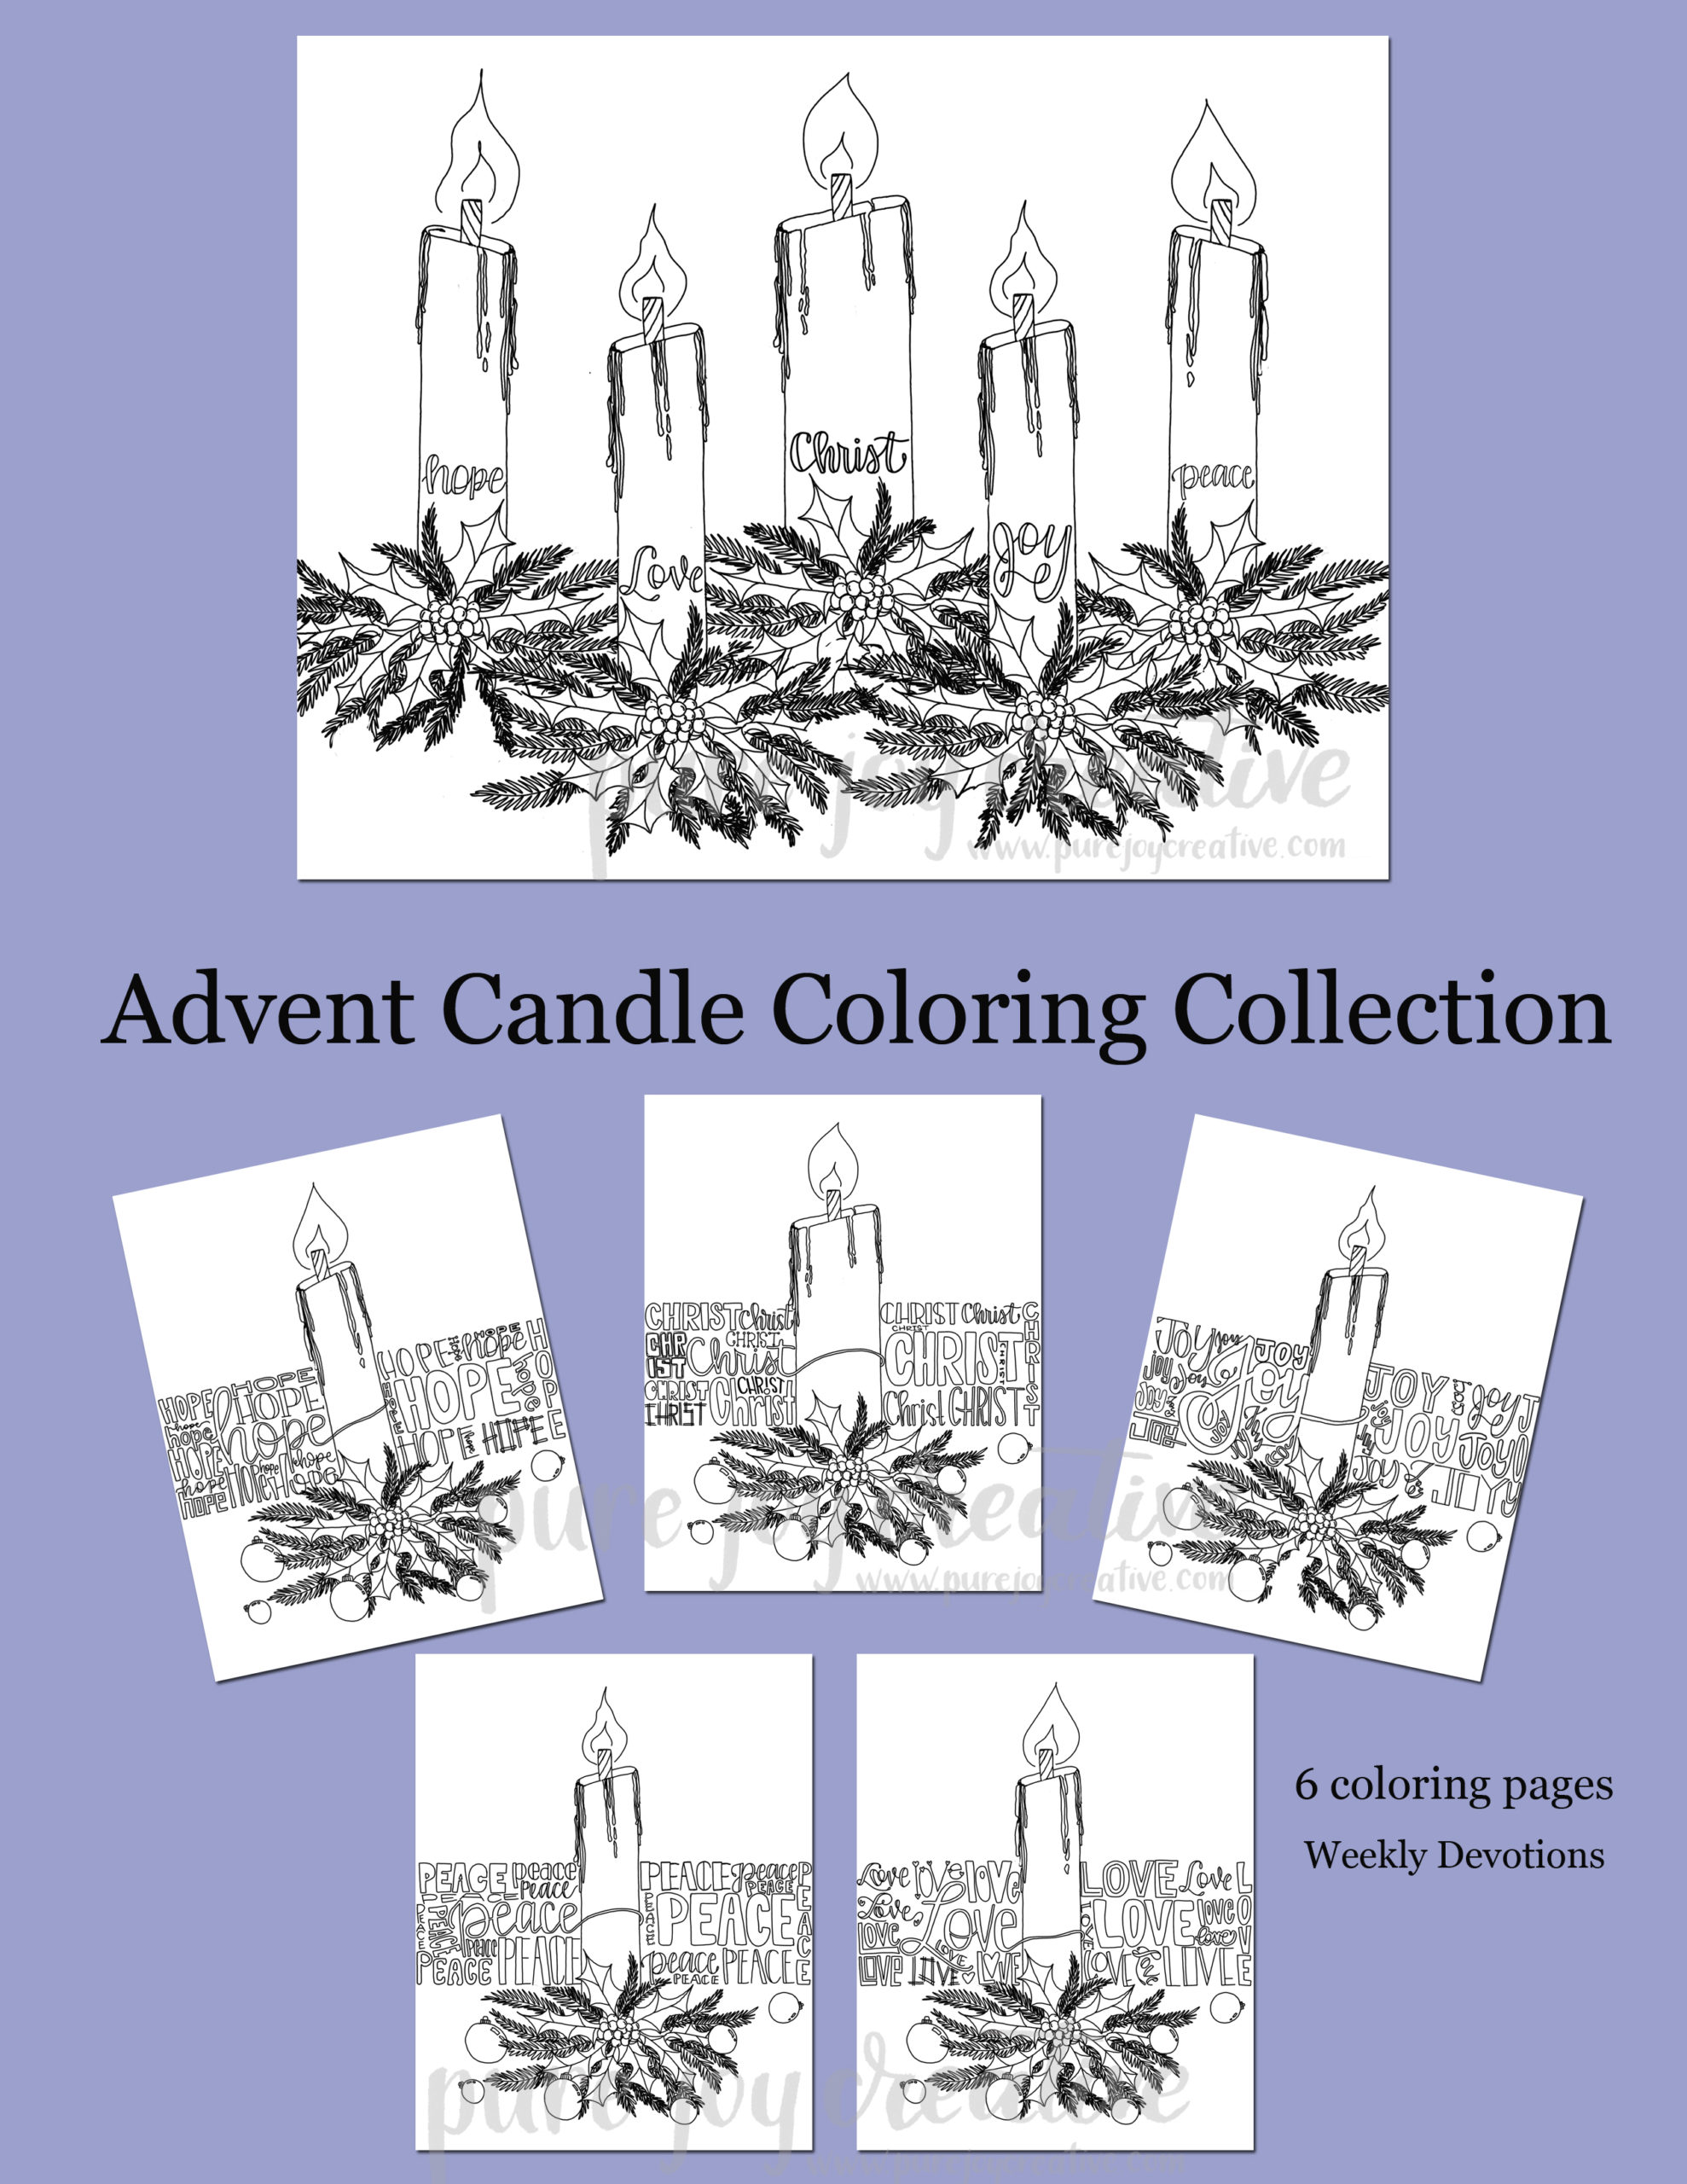 Advent candle coloring pages